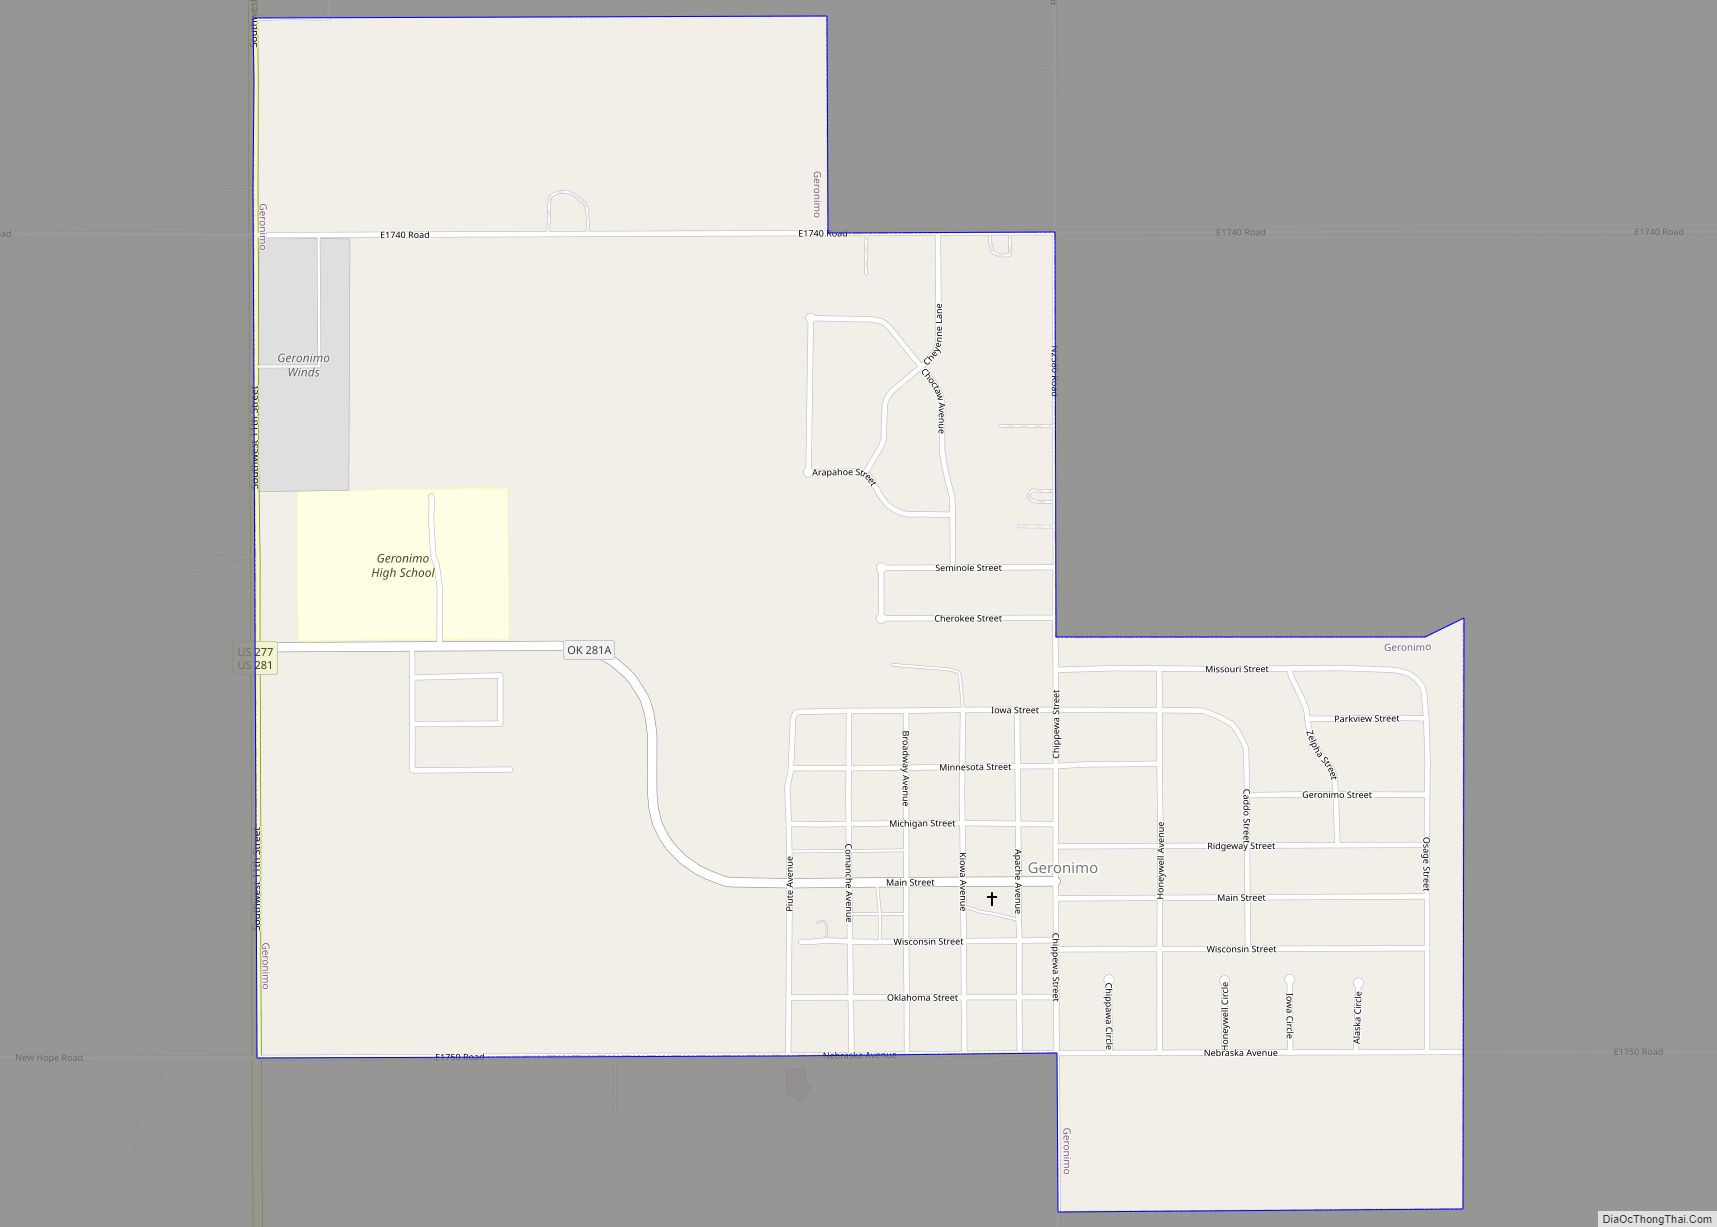 Map of Geronimo town